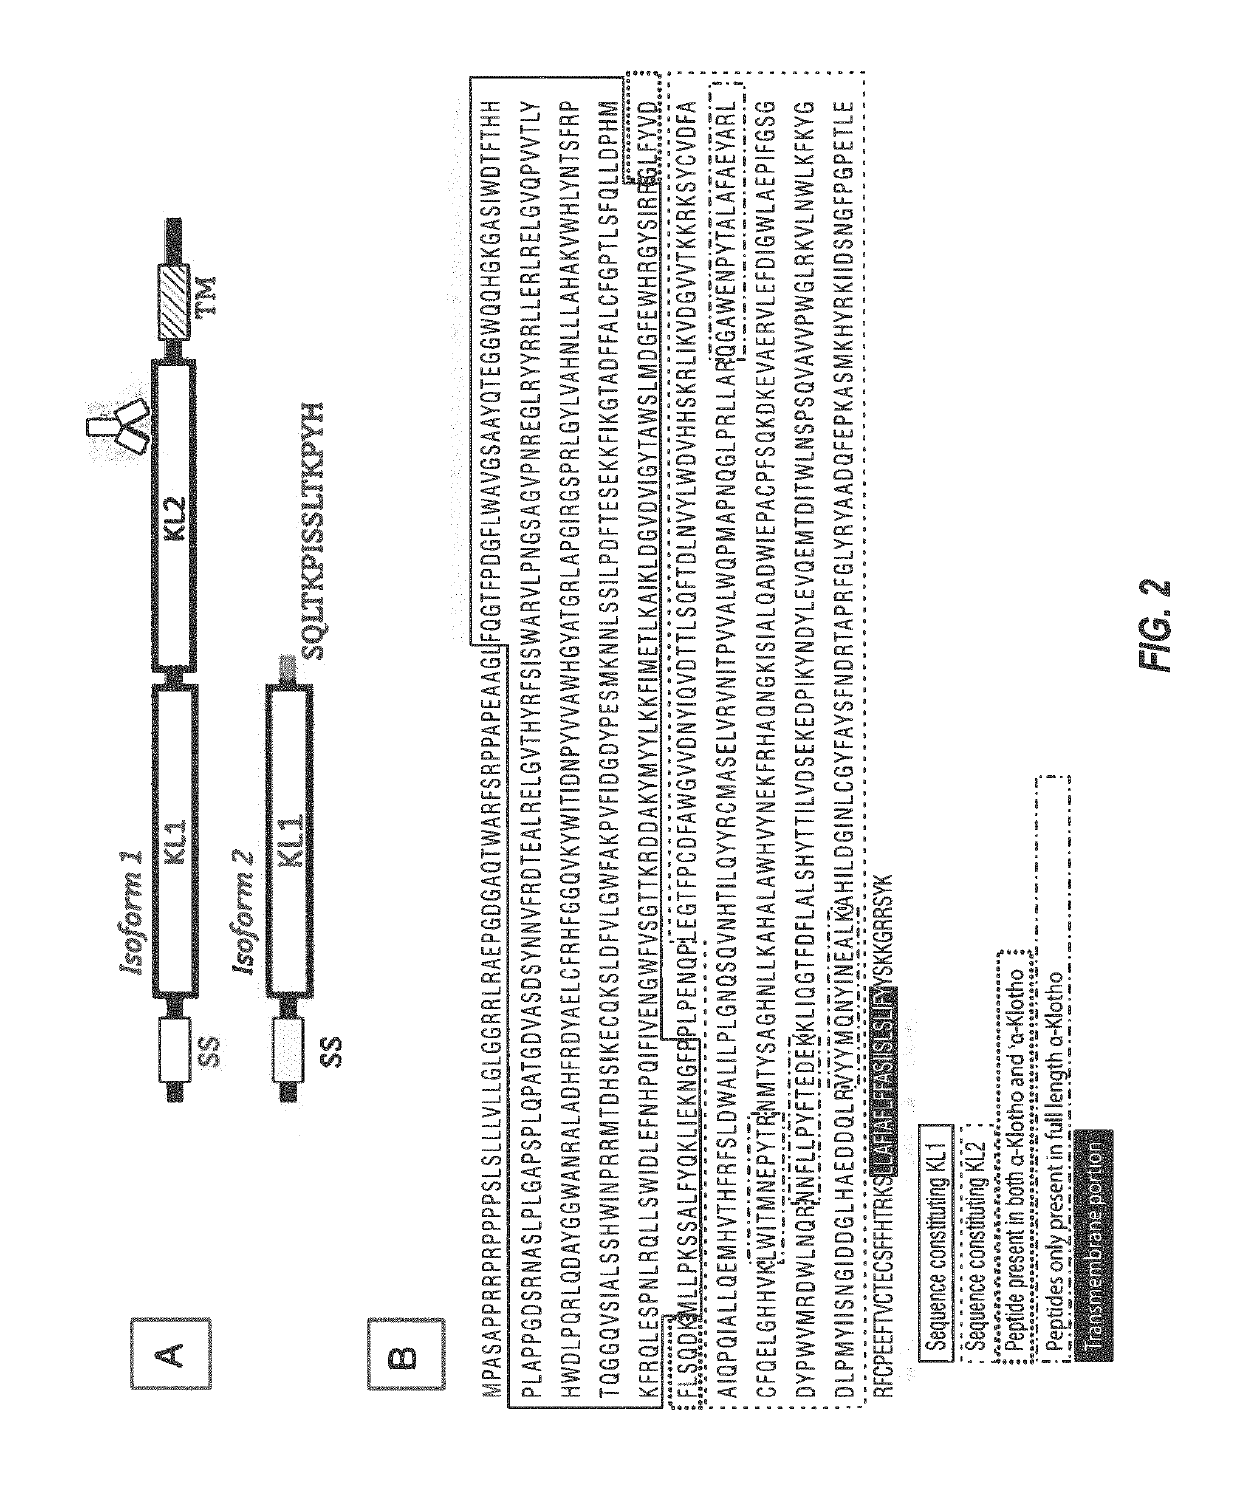 Products and methods for assessing and increasing klotho protein levels